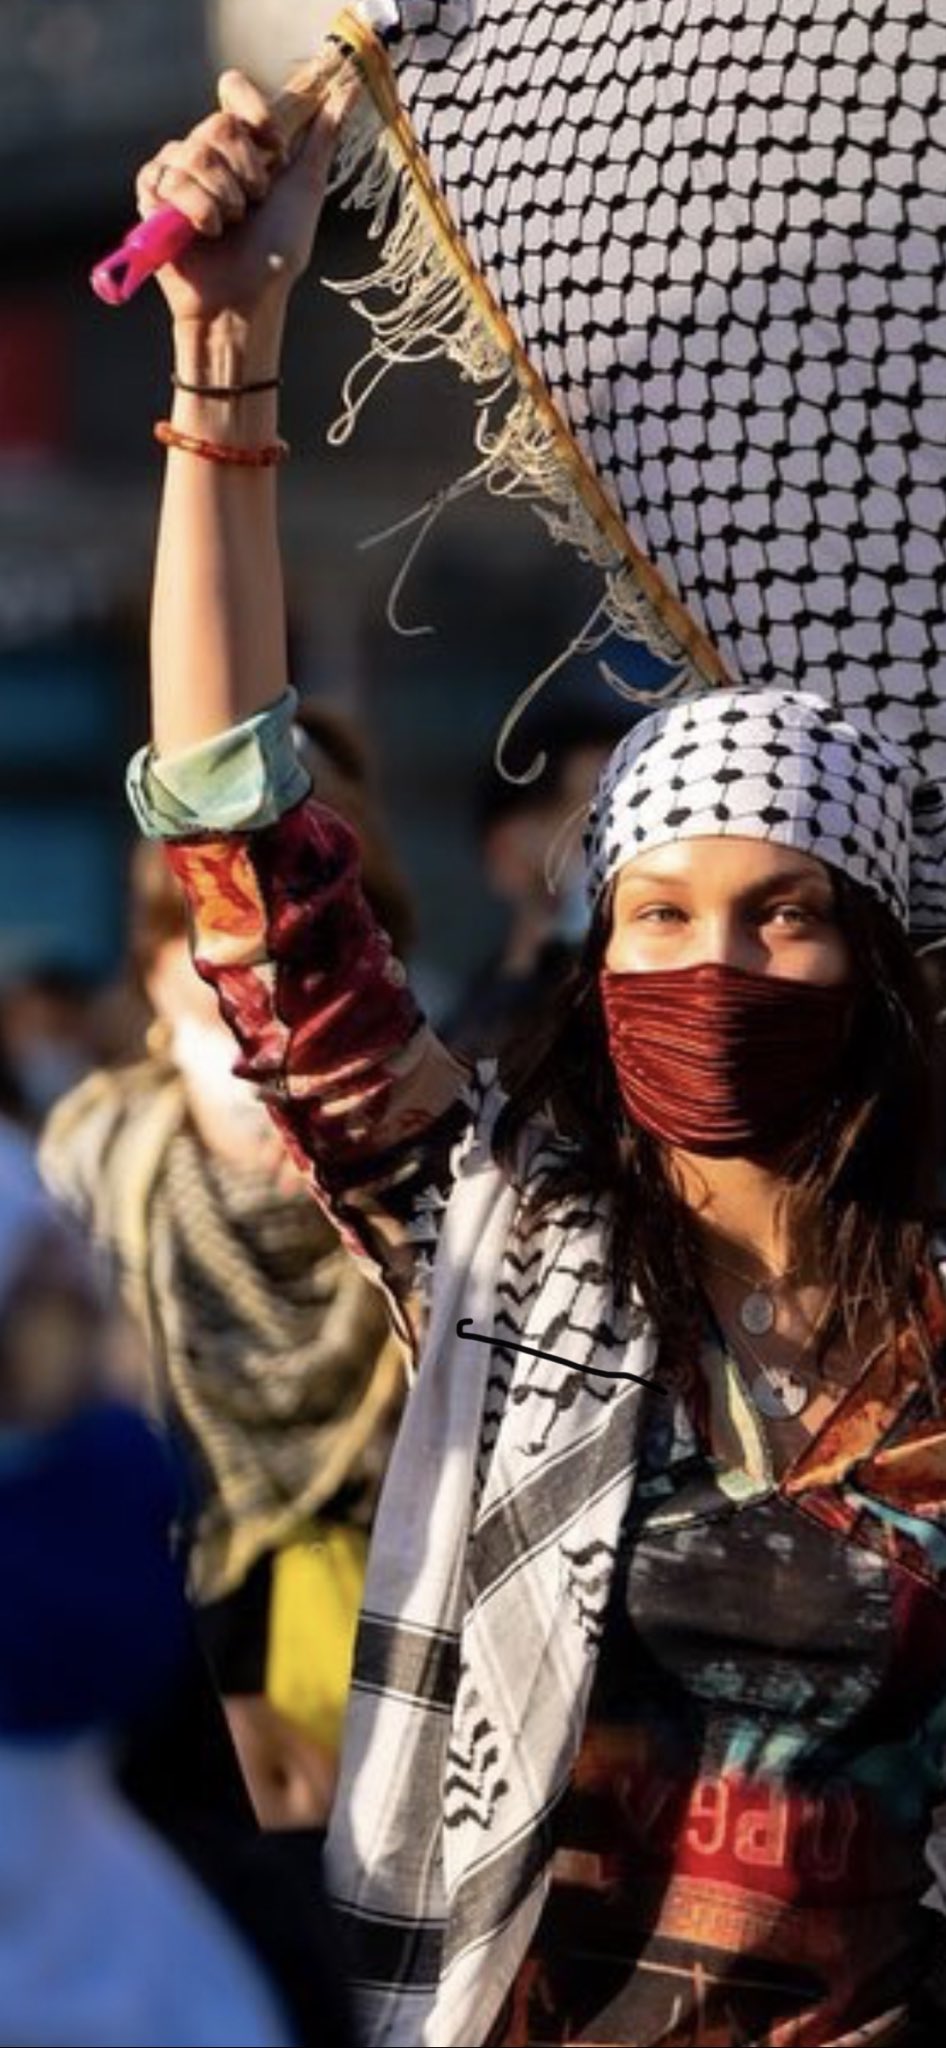 Vengeance Is Mine Pa Twitter Bella Hadid Joins Pro Palestine March In Nyc Wearing A Traditional Dress A Keffiyeh A Face Mask And Waving A Large Palestinian Pale Flag As She Marched Along With Thousands Of Others Https T Co Thtz3k5yof